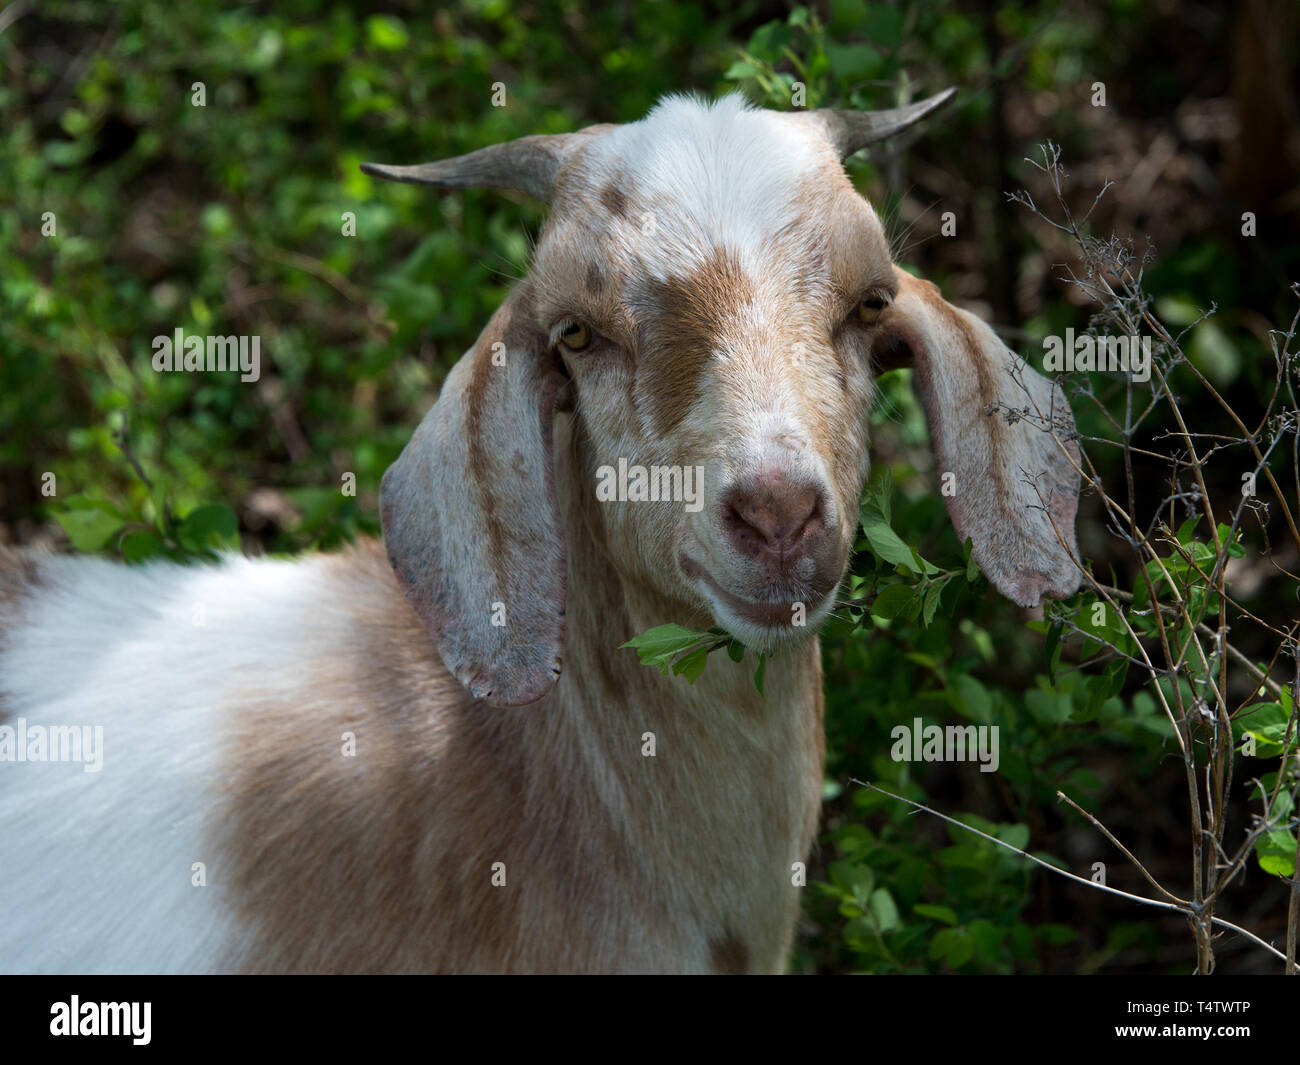 A 'targeted grazing' or 'conservation grazing' goat takes a break from nibbling on a plants in Southwoods Park, West Des Moines, Iowa Stock Photo